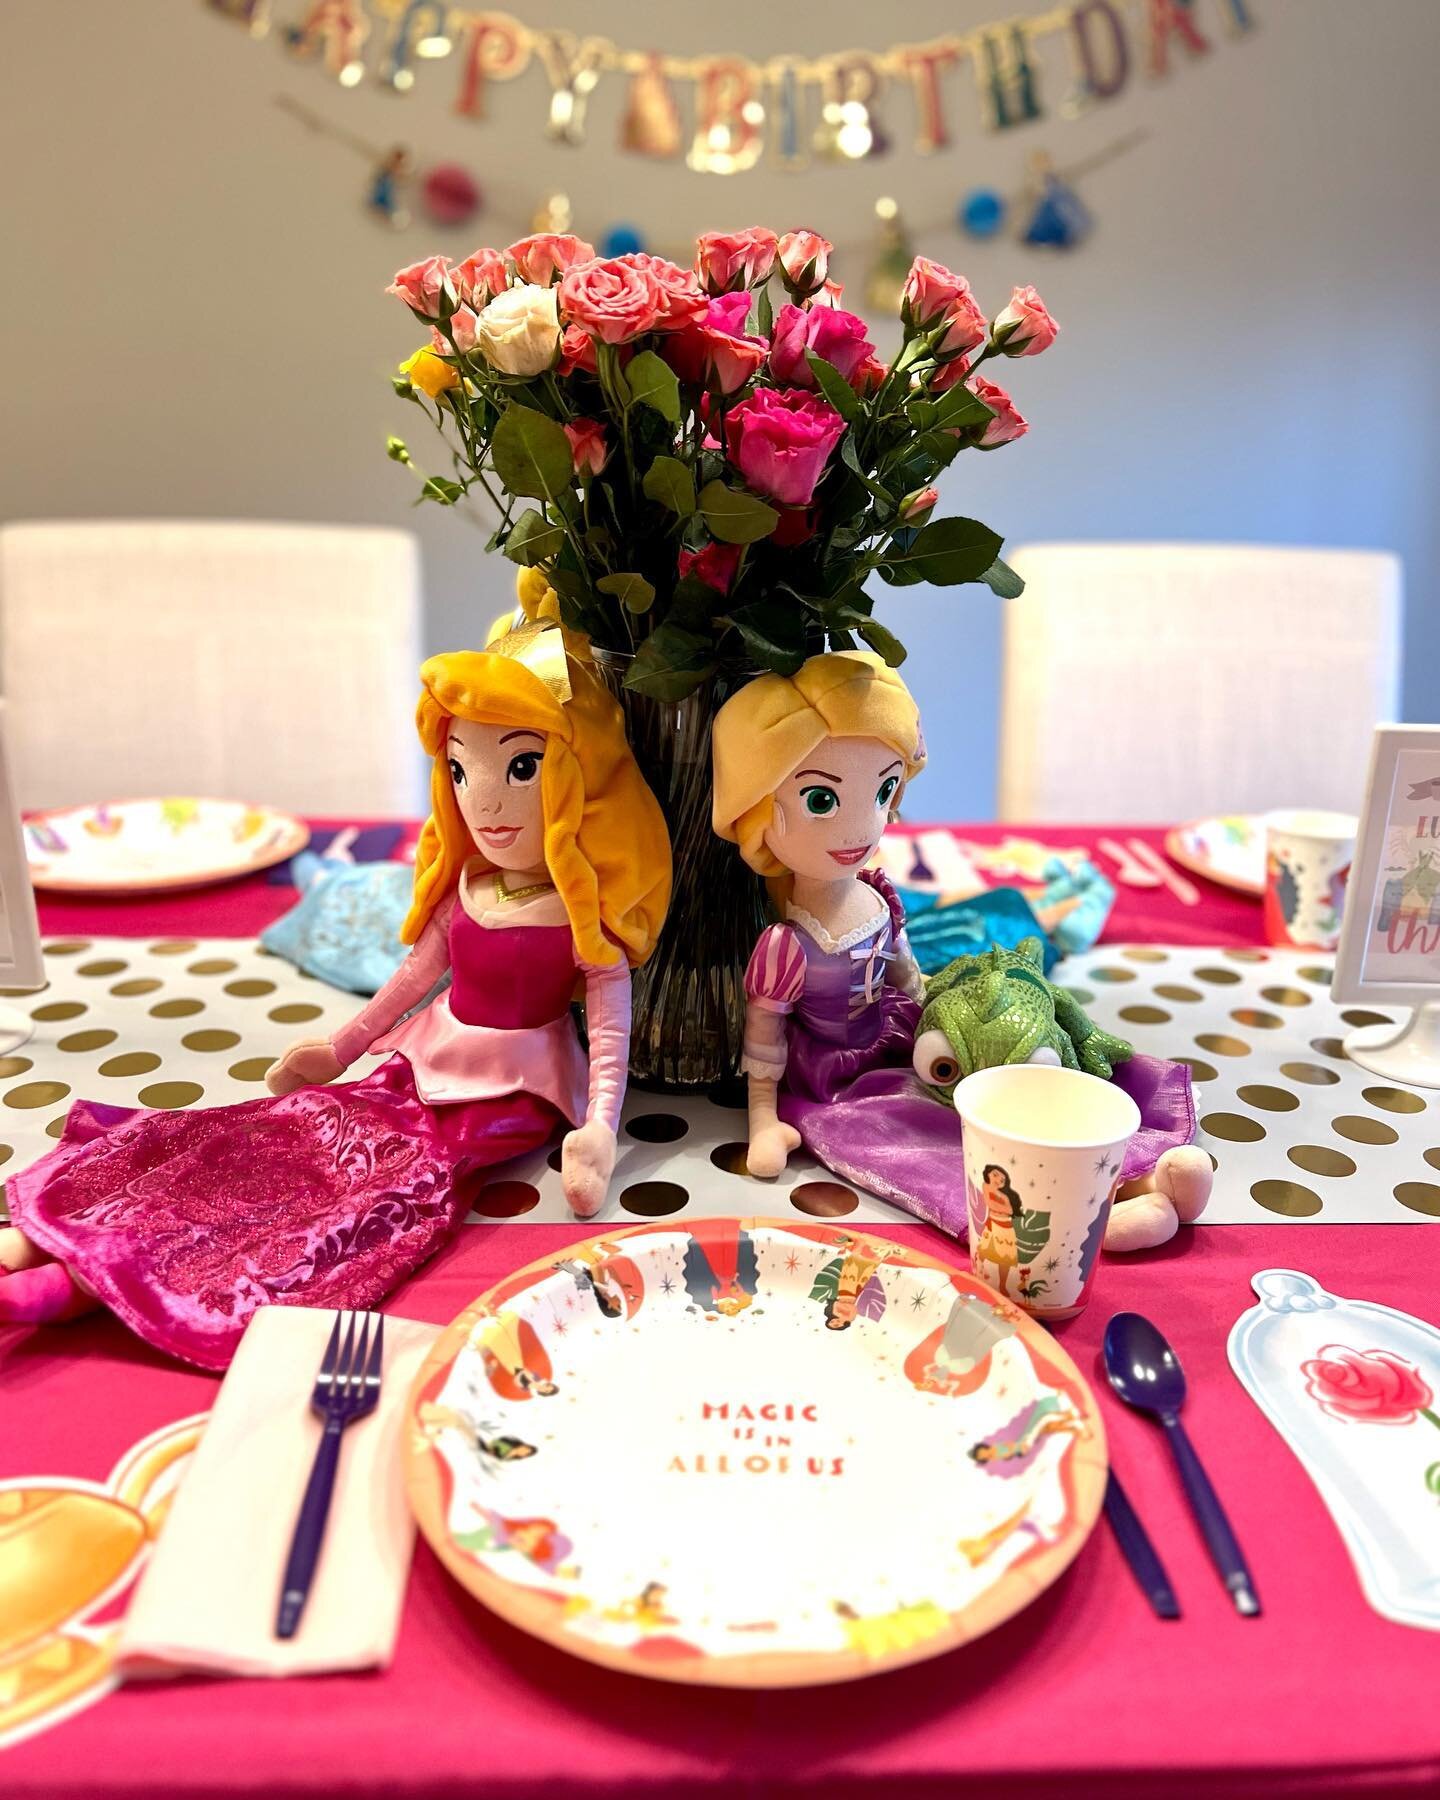 We had so much fun celebrating our little princess who turned 3 earlier this month! Party tip: use your child&rsquo;s toys in your decor if it already fits the theme! I grabbed some of Lucy&rsquo;s princess dolls to create centerpieces on the tables!